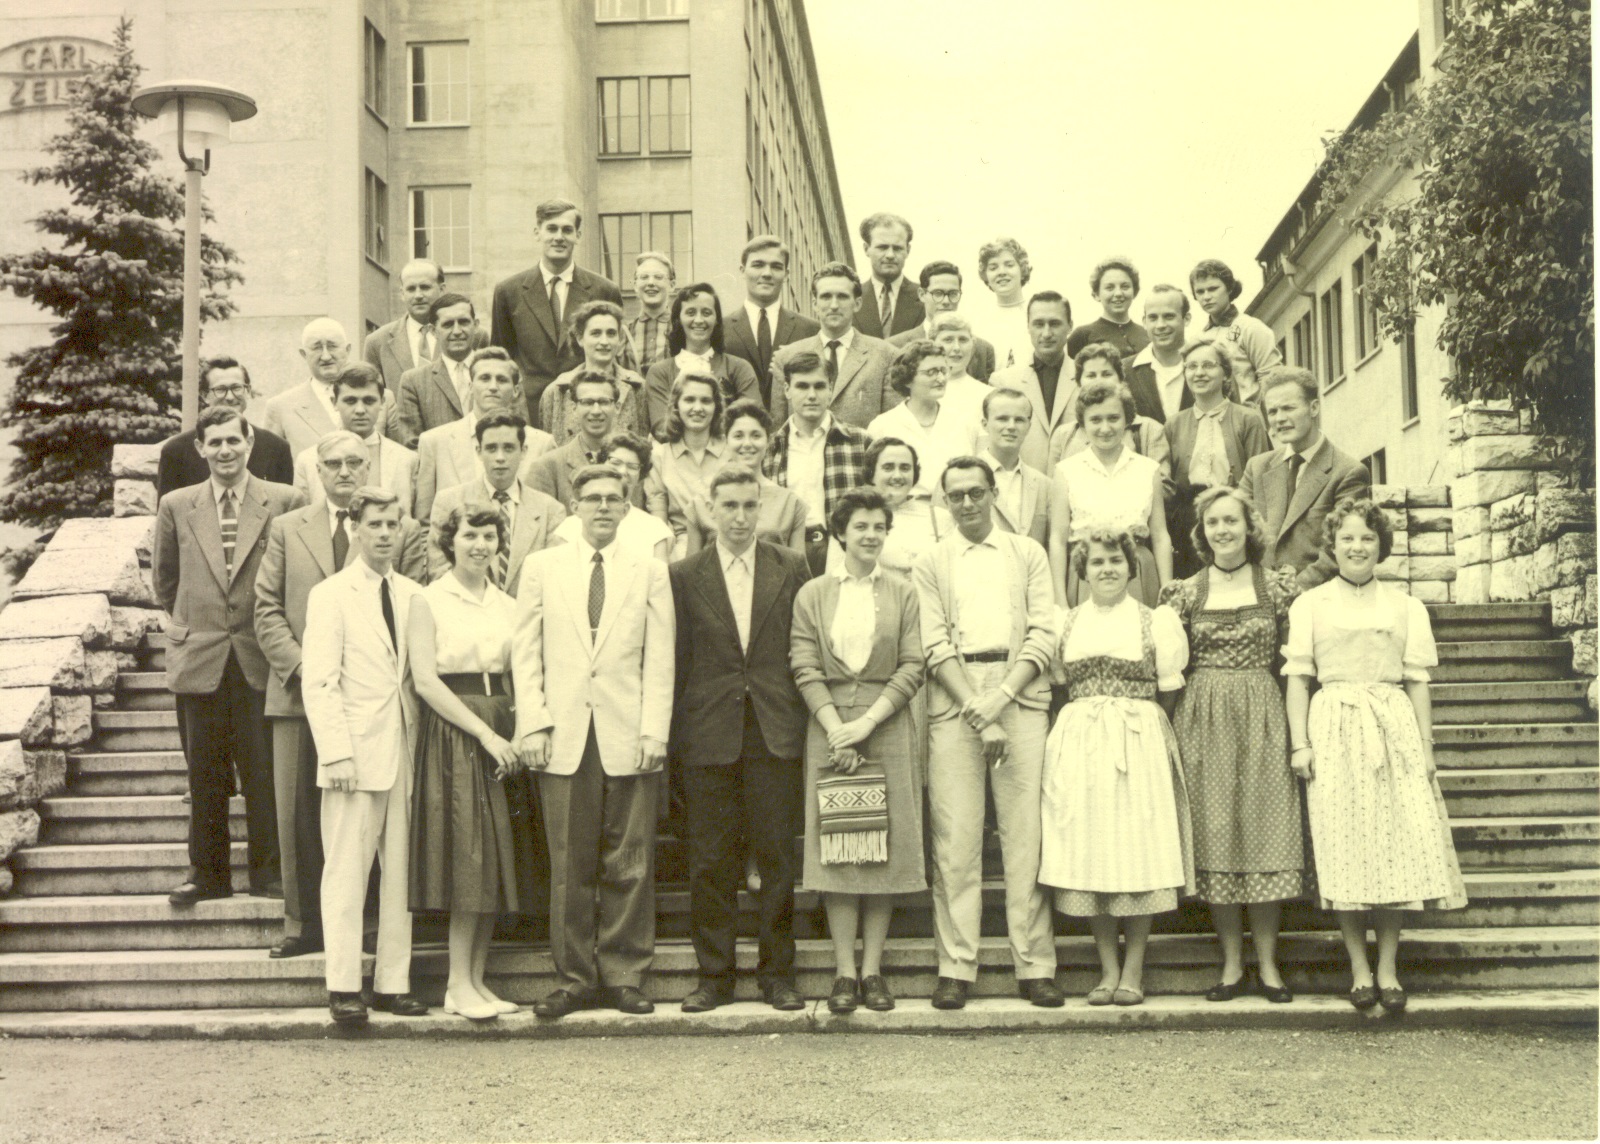 JYM 1956-57 Class photo: Ken Wiggins is in the second row, third from right in the white blazer. In the second row far left: Herr Hildebrand ( JYM office manager) . In the second to back row, the dark-haired man on the far left is JYM resident director, Prof. Dobert; next to him is a young Frau Dr. Riegler and next to her, the JYM staff secretary, Pat Wilson. Just in front of Dr. Dobert is Ken Kurze in a light-colored blazer